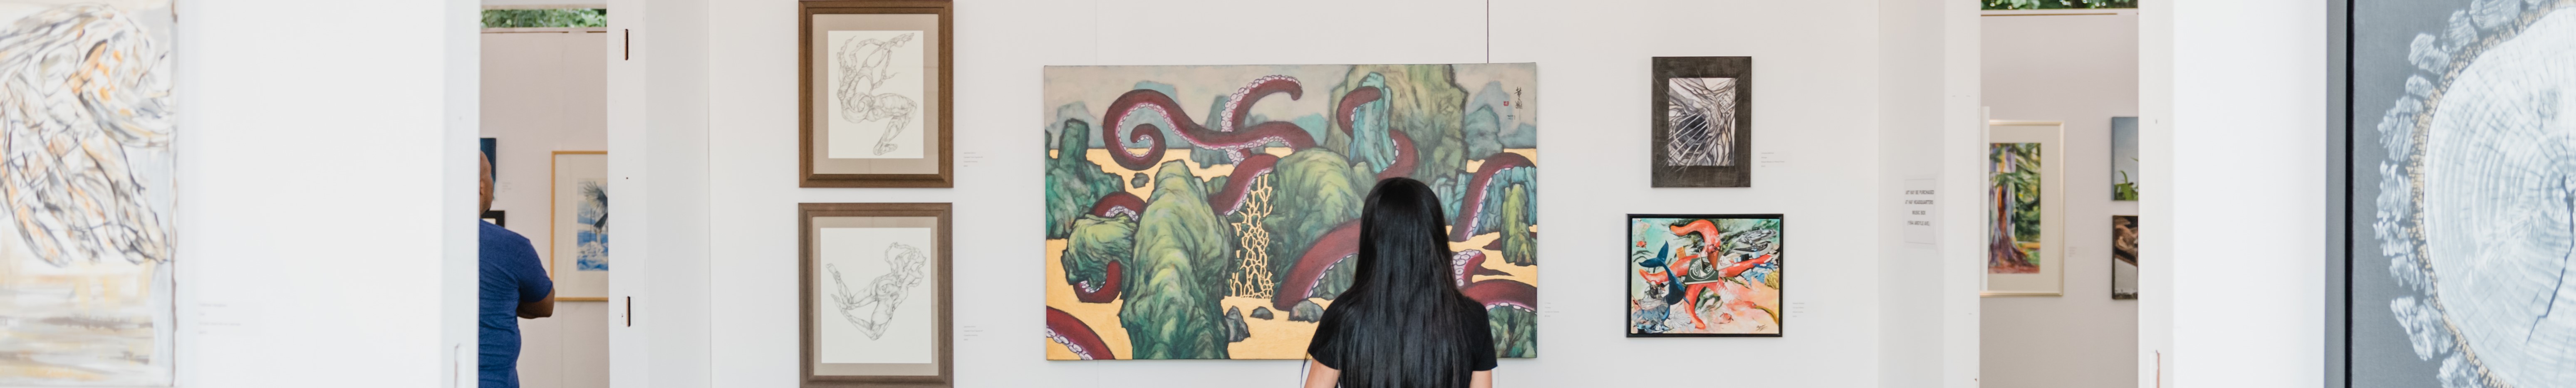 A woman admiring a painting in an art gallery, captivated by the colors and brushstrokes.